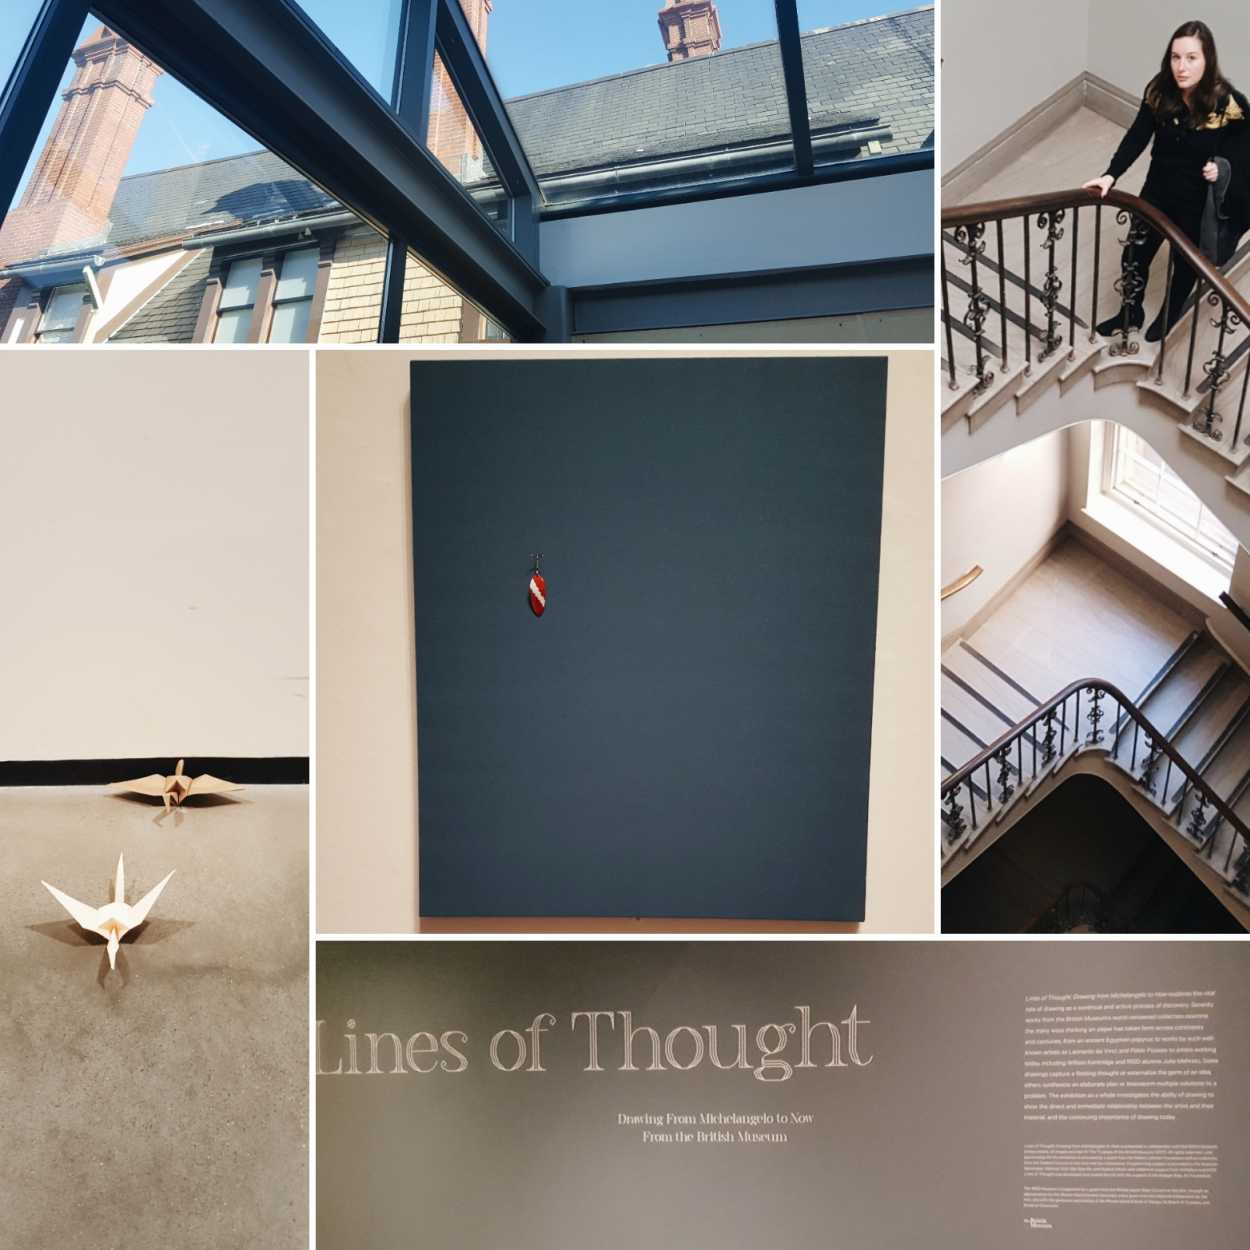 Collage of exhibits and sights at RISD